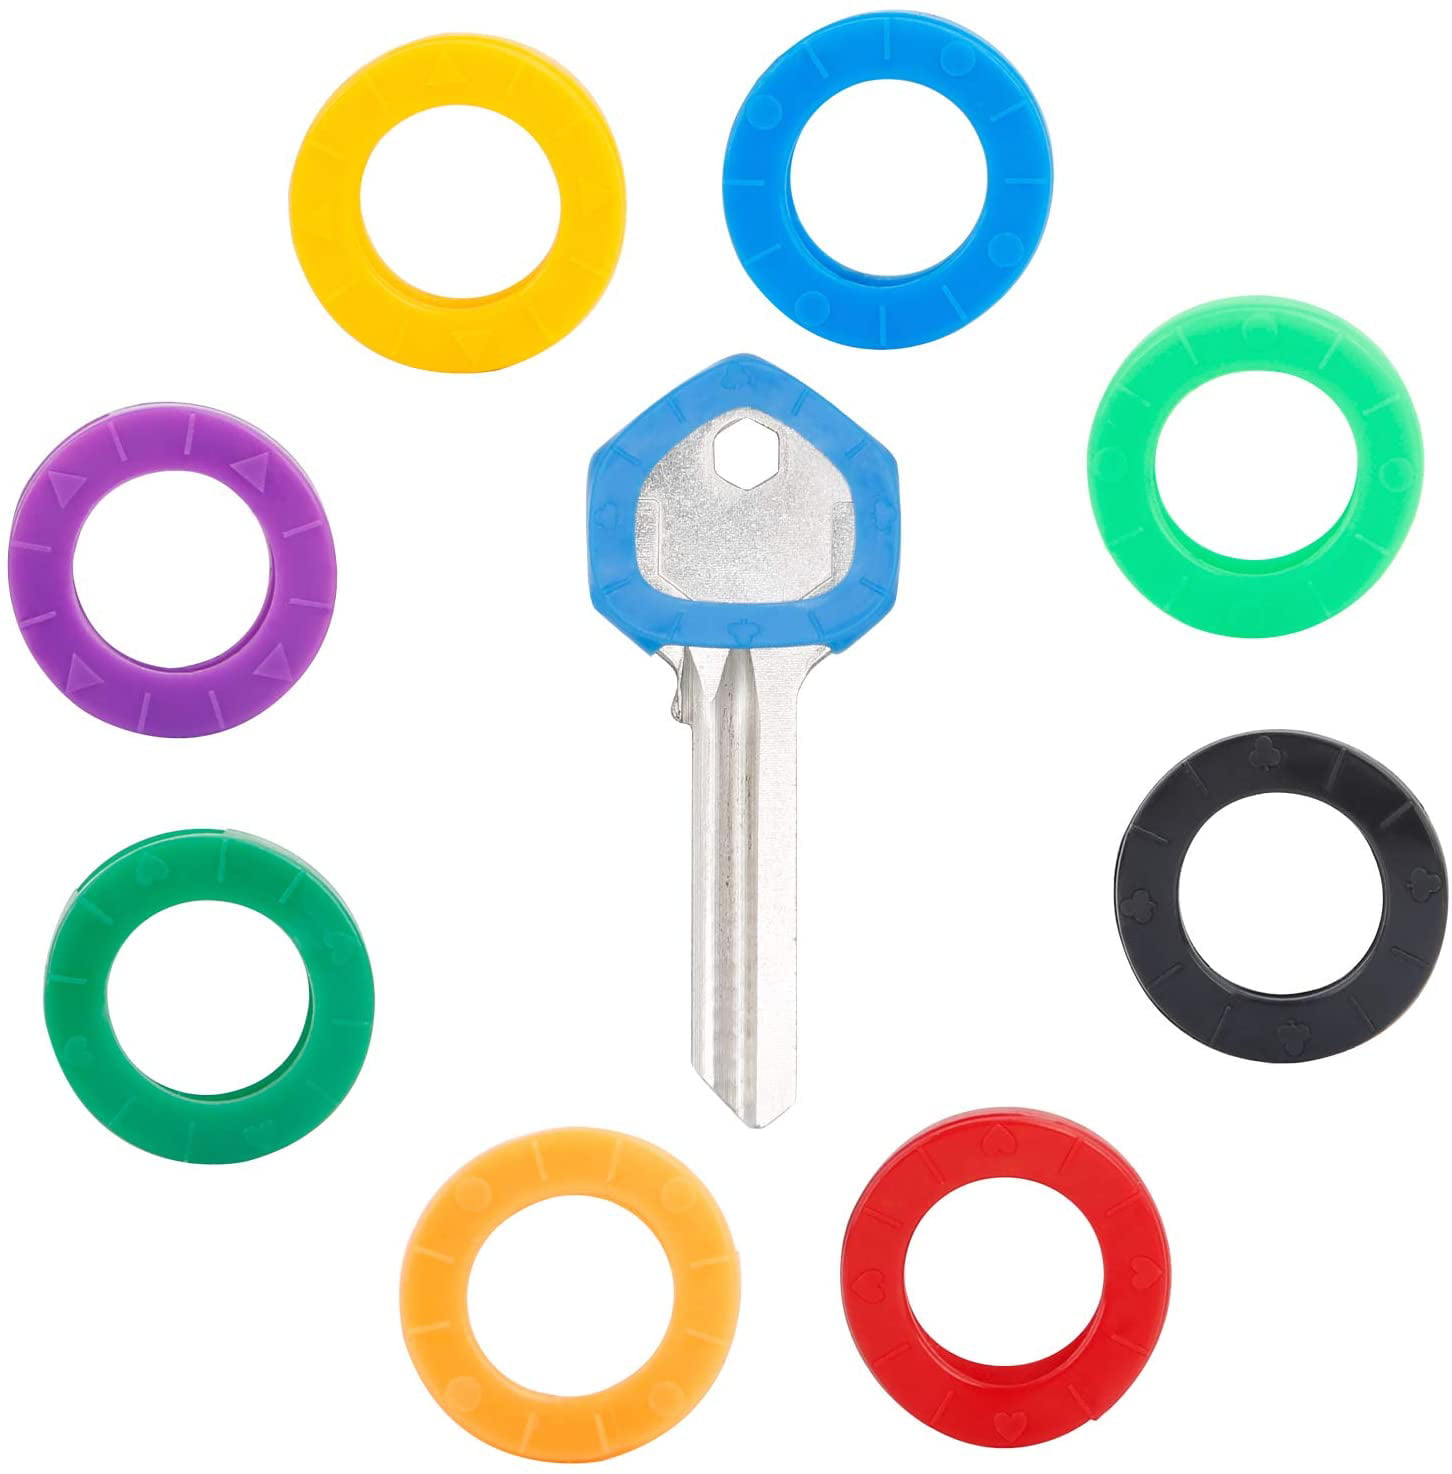 8~50pcs Mutli-color Hollow Silicone Key Cap Covers Topper Keyring Fun Keychain